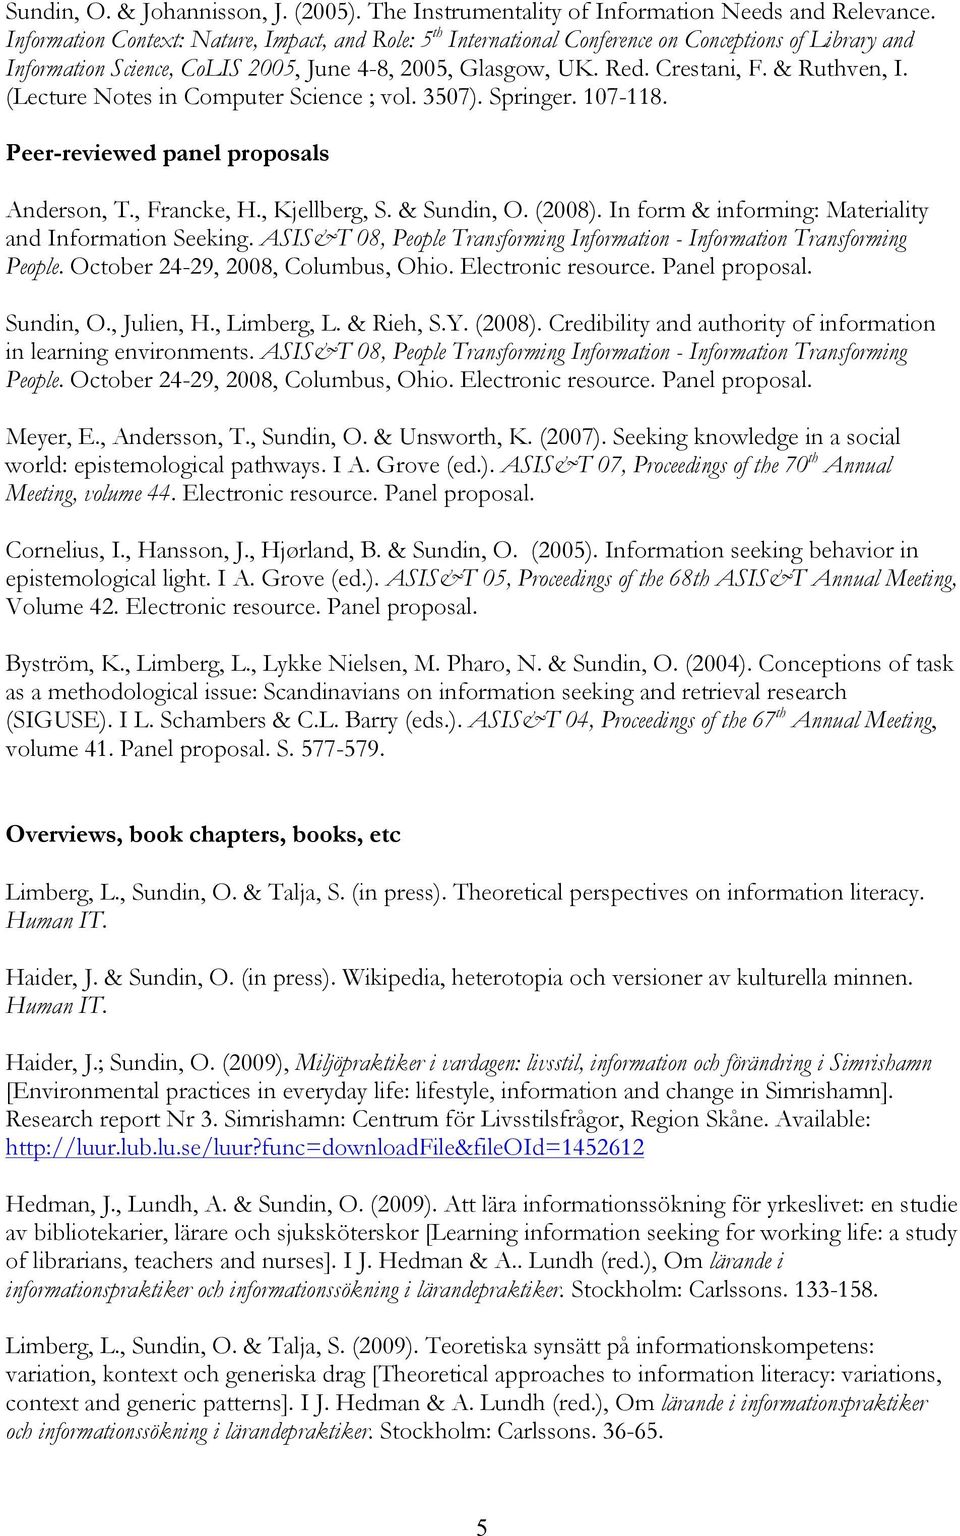 (Lecture Notes in Computer Science ; vol. 3507). Springer. 107-118. Peer-reviewed panel proposals Anderson, T., Francke, H., Kjellberg, S. & Sundin, O. (2008).